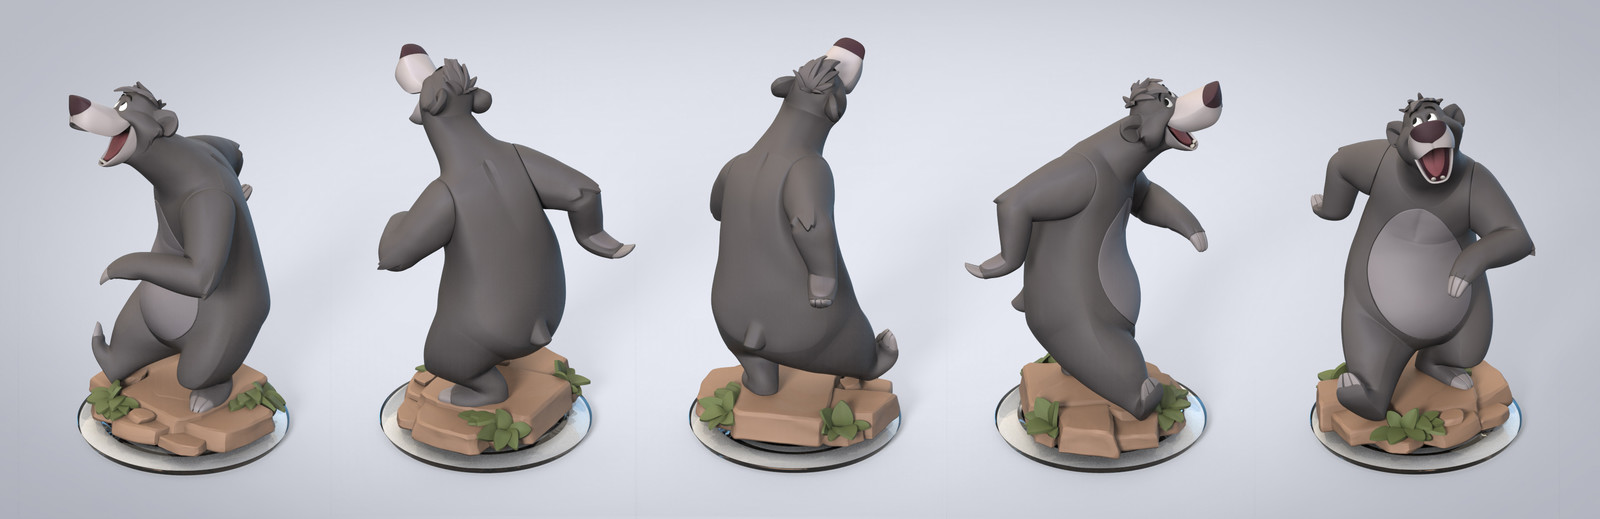 Baloo toy sculpt I collaborated on with Brad Bolinder (a.k.a. the badass knight)